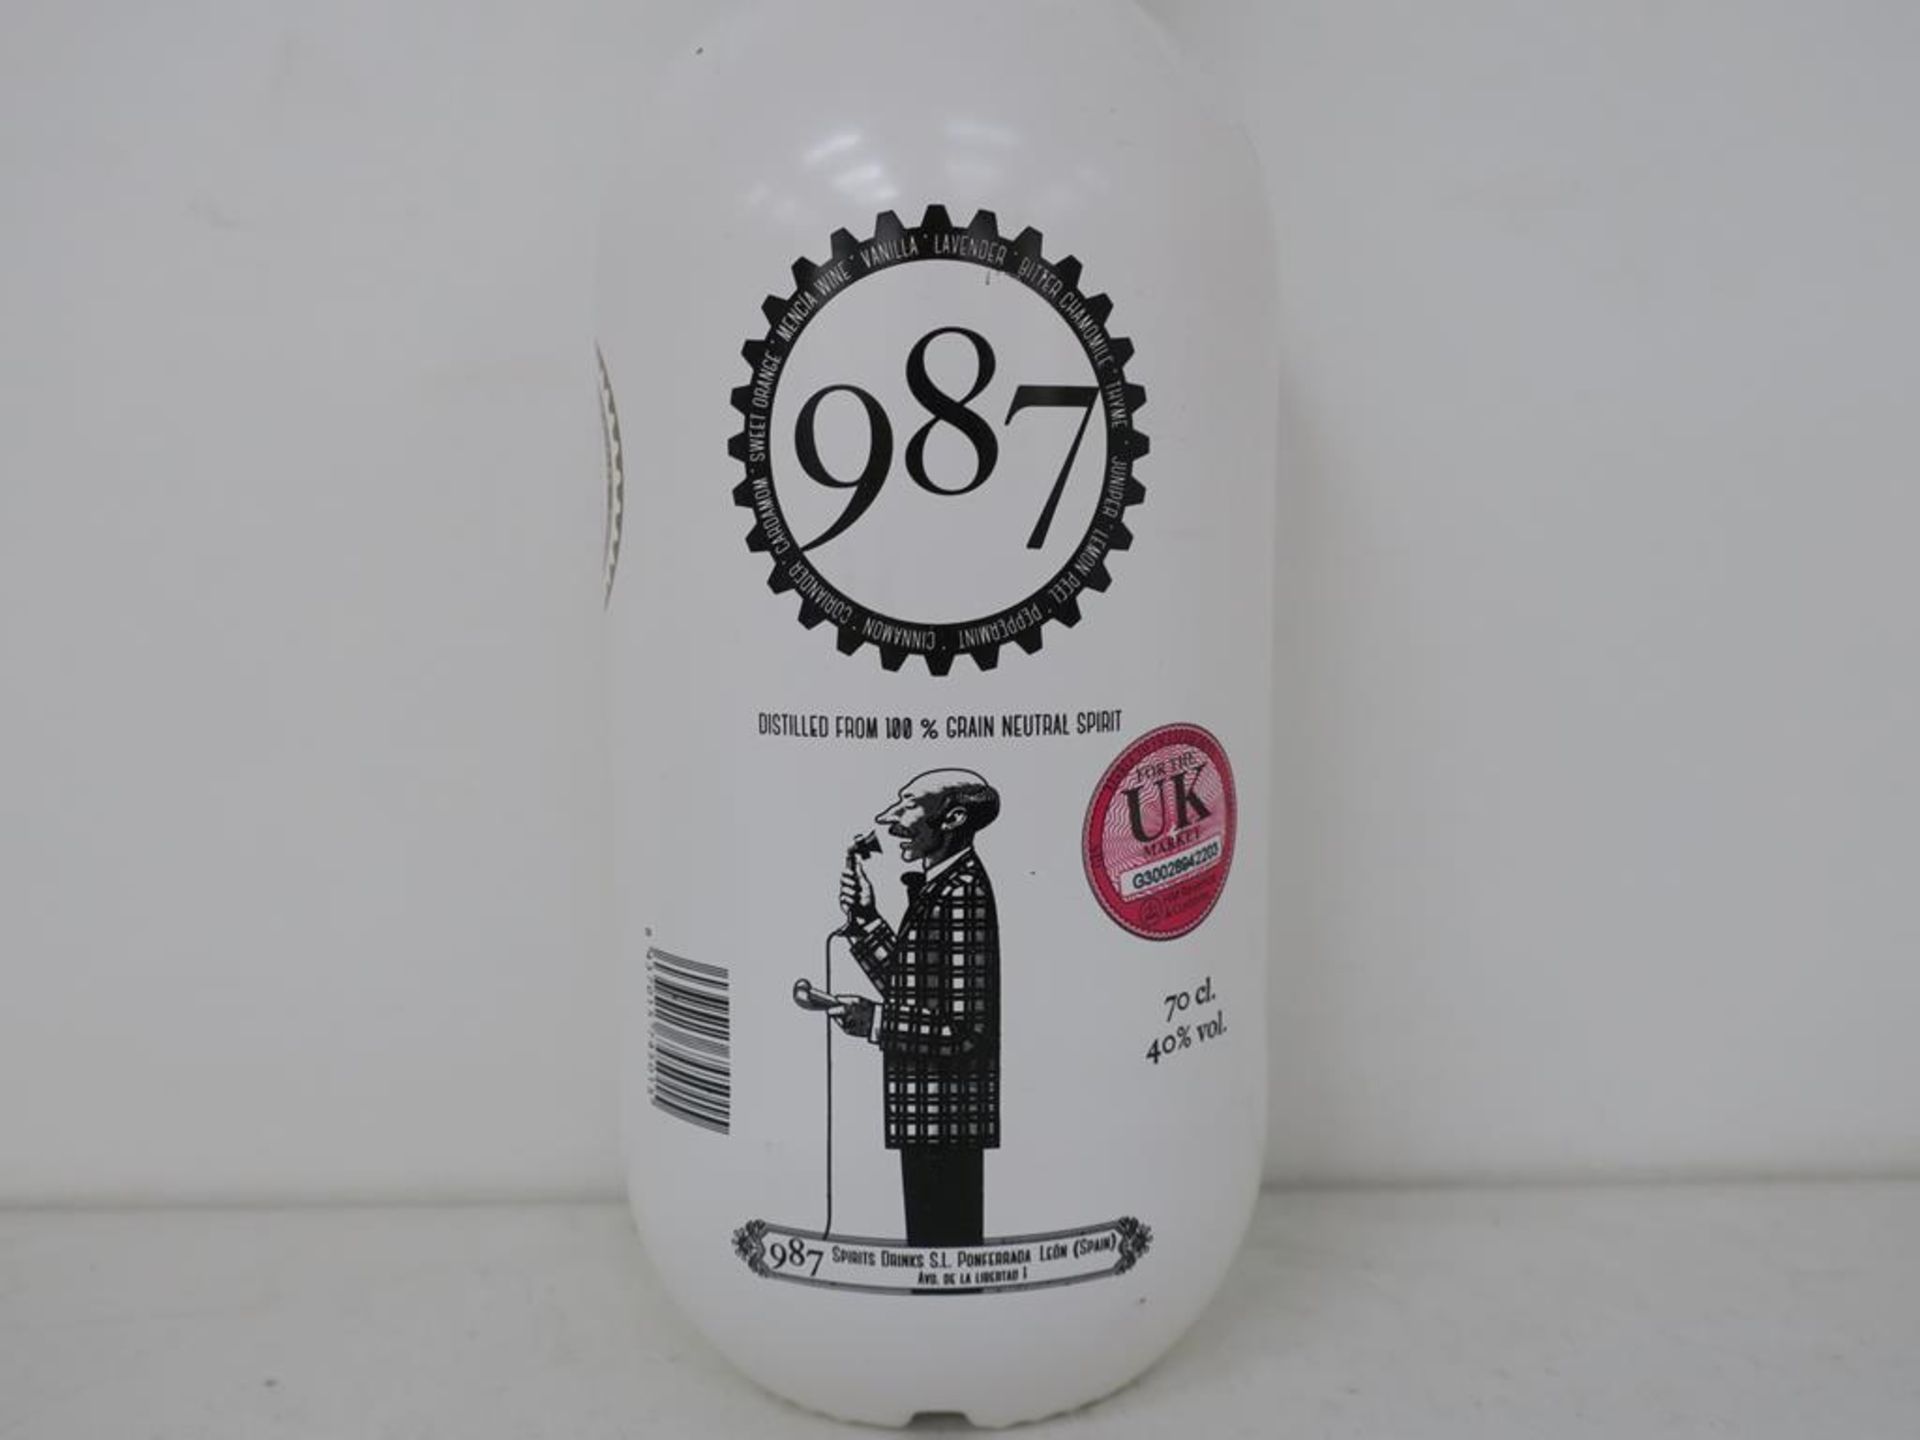 * Three bottles of Gin: a 70cl bottle of Caspyn Midsummer Dry Gin 40% vol, a 70cl bottle of 987 - Image 6 of 7